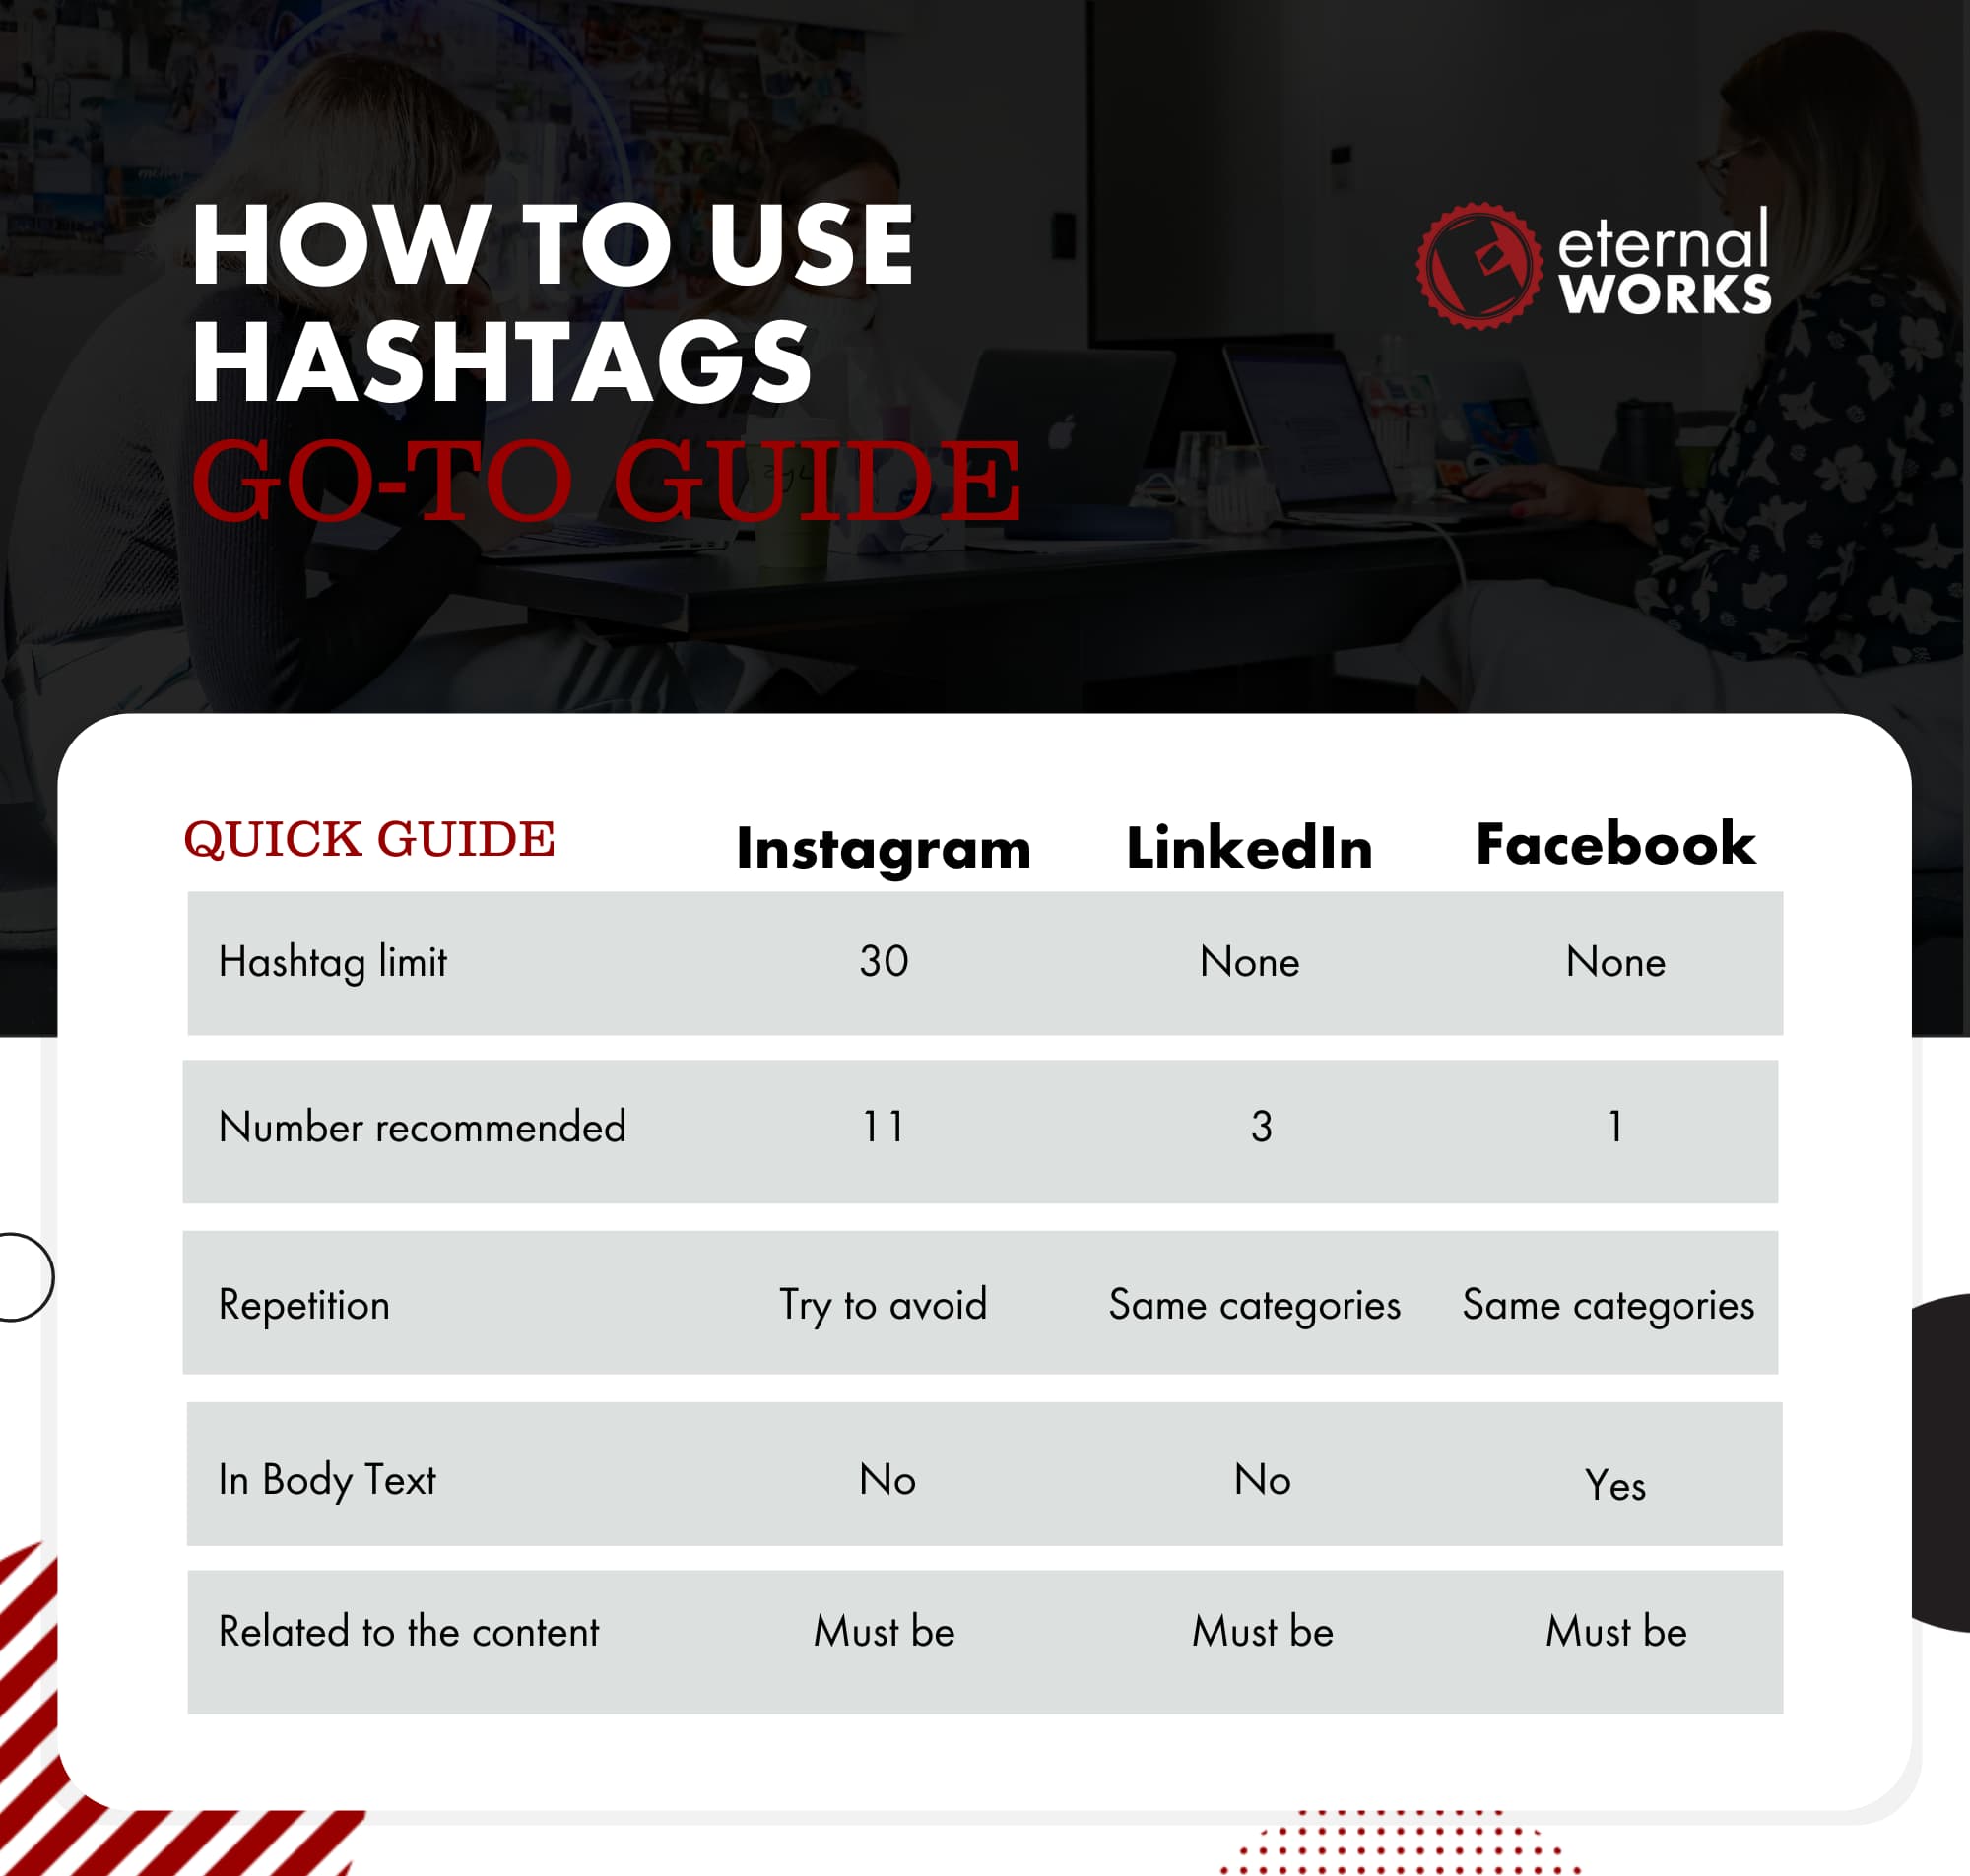 HOW TO USE HASHTAGS [2022 GUIDE FOR INSTAGRAM, FACEBOOK, AND LINKEDIN] (210 x 200 mm)